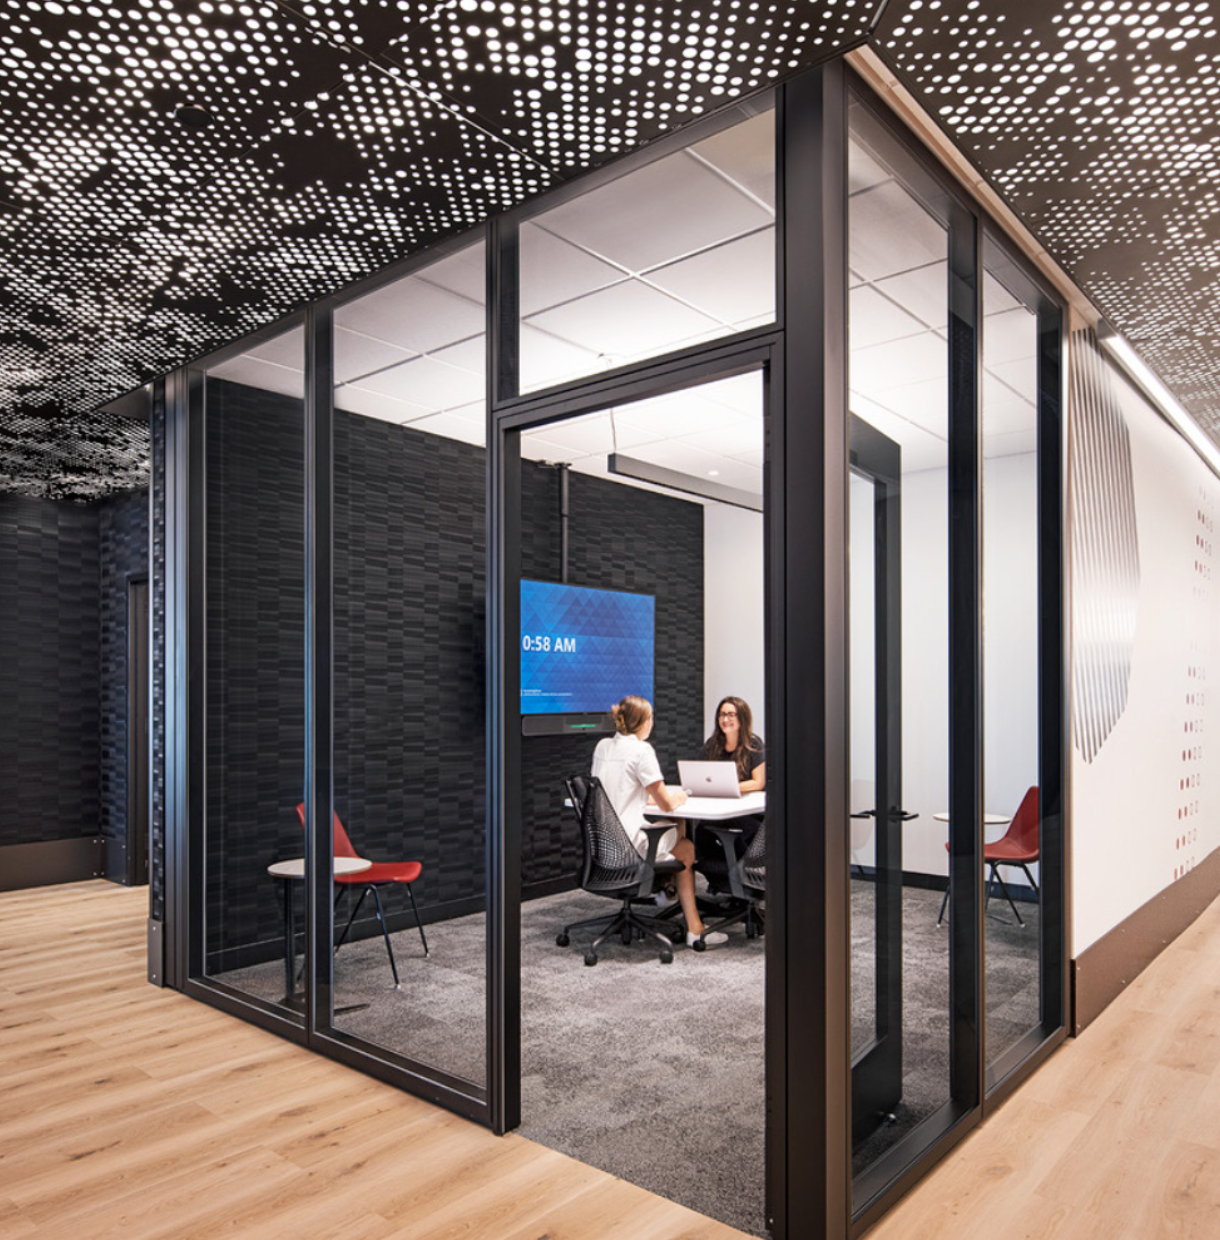 An intimate quiet meeting place in Rocket Mortgage Technology's headquarters.